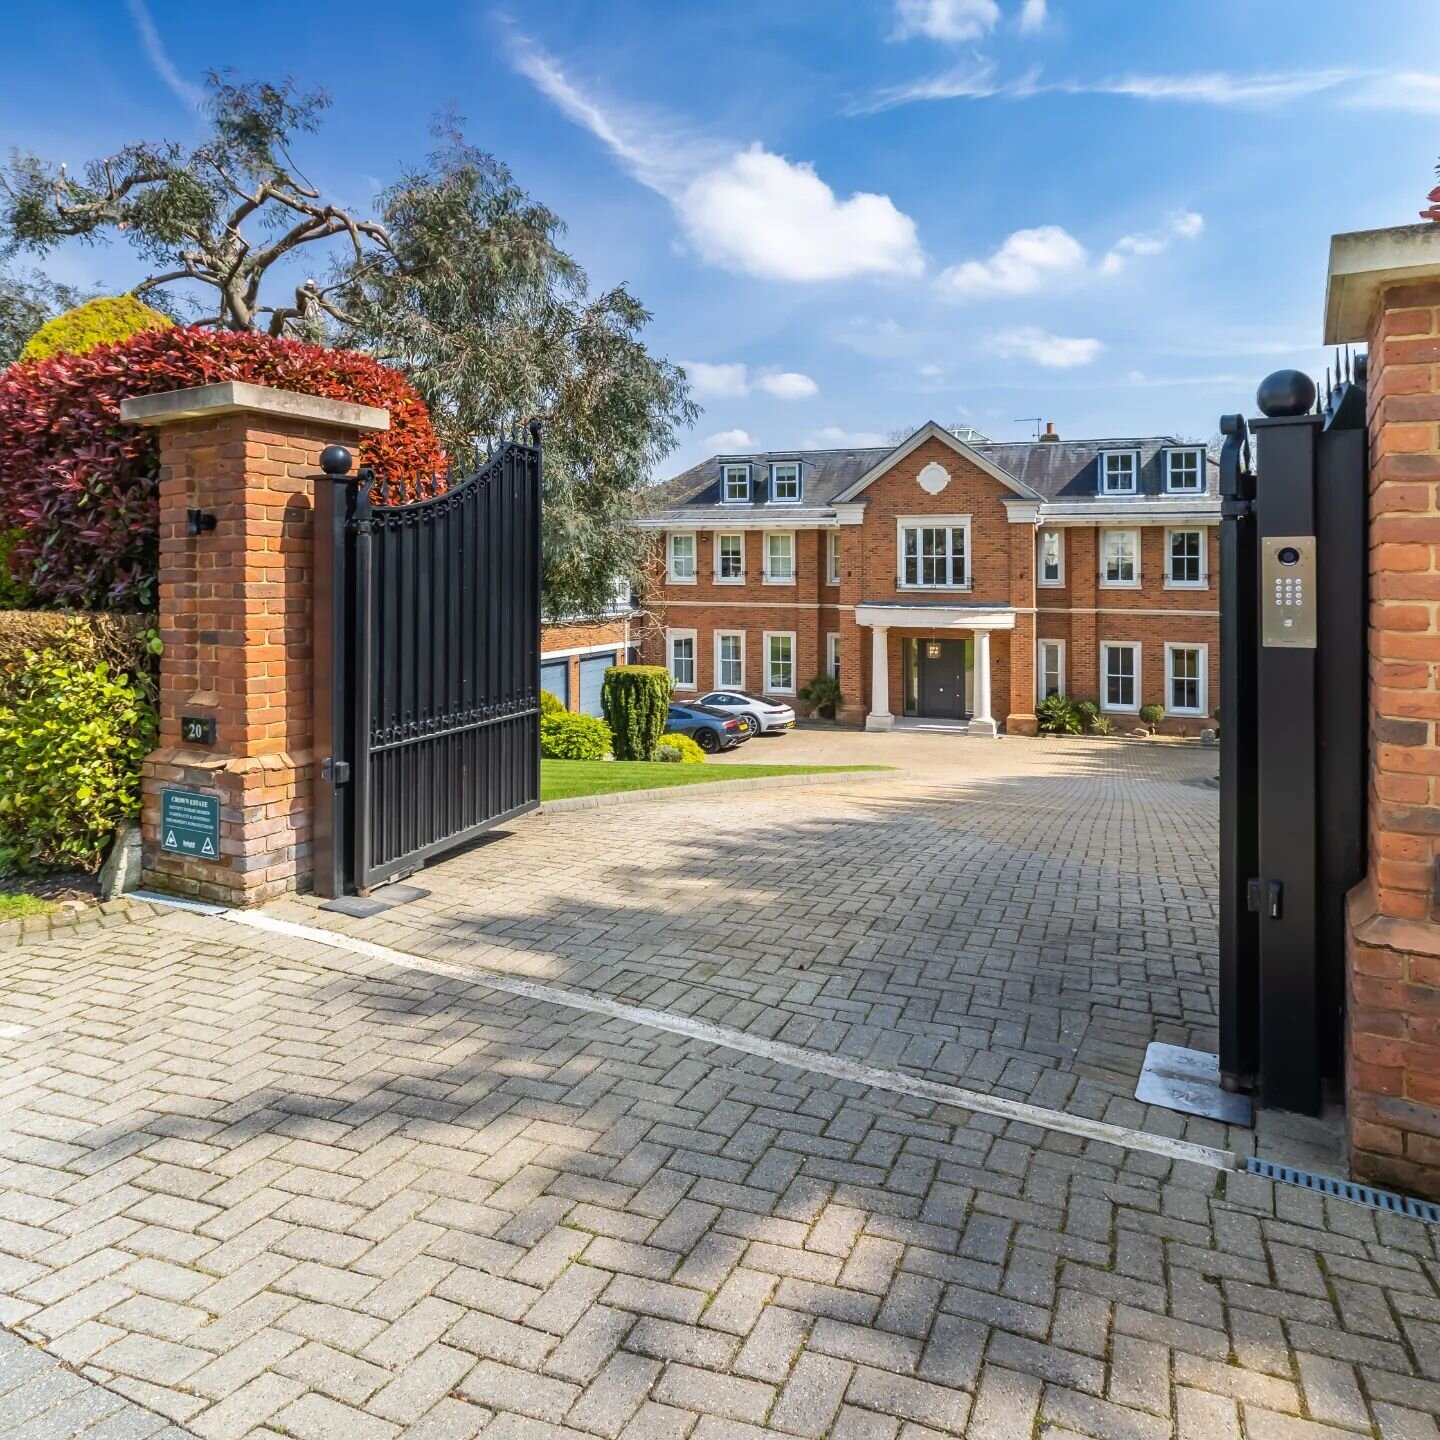 A property with such grandeur and an amazing family home 😍 

&pound;6,750,000 with Savills on the Crown Estate in Oxshott